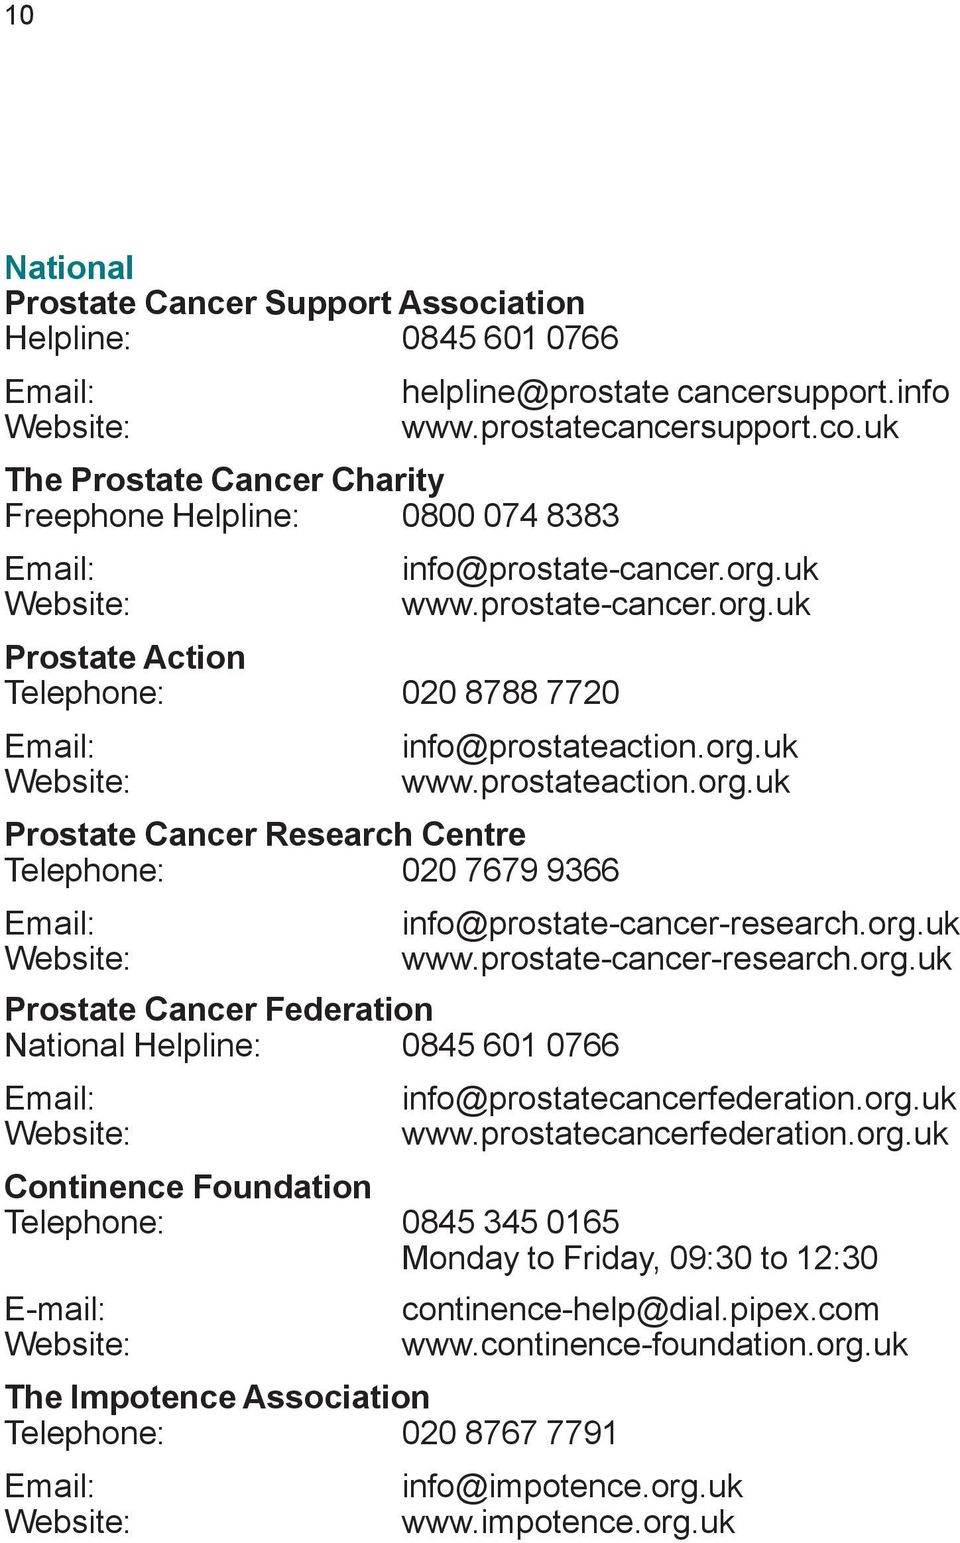 org.uk www.prostate-cancer-research.org.uk info@prostatecancerfederation.org.uk www.prostatecancerfederation.org.uk Continence Foundation Telephone: 0845 345 0165 Monday to Friday, 09:30 to 12:30 E-mail: The Impotence Association Telephone: 020 8767 7791 continence-help@dial.